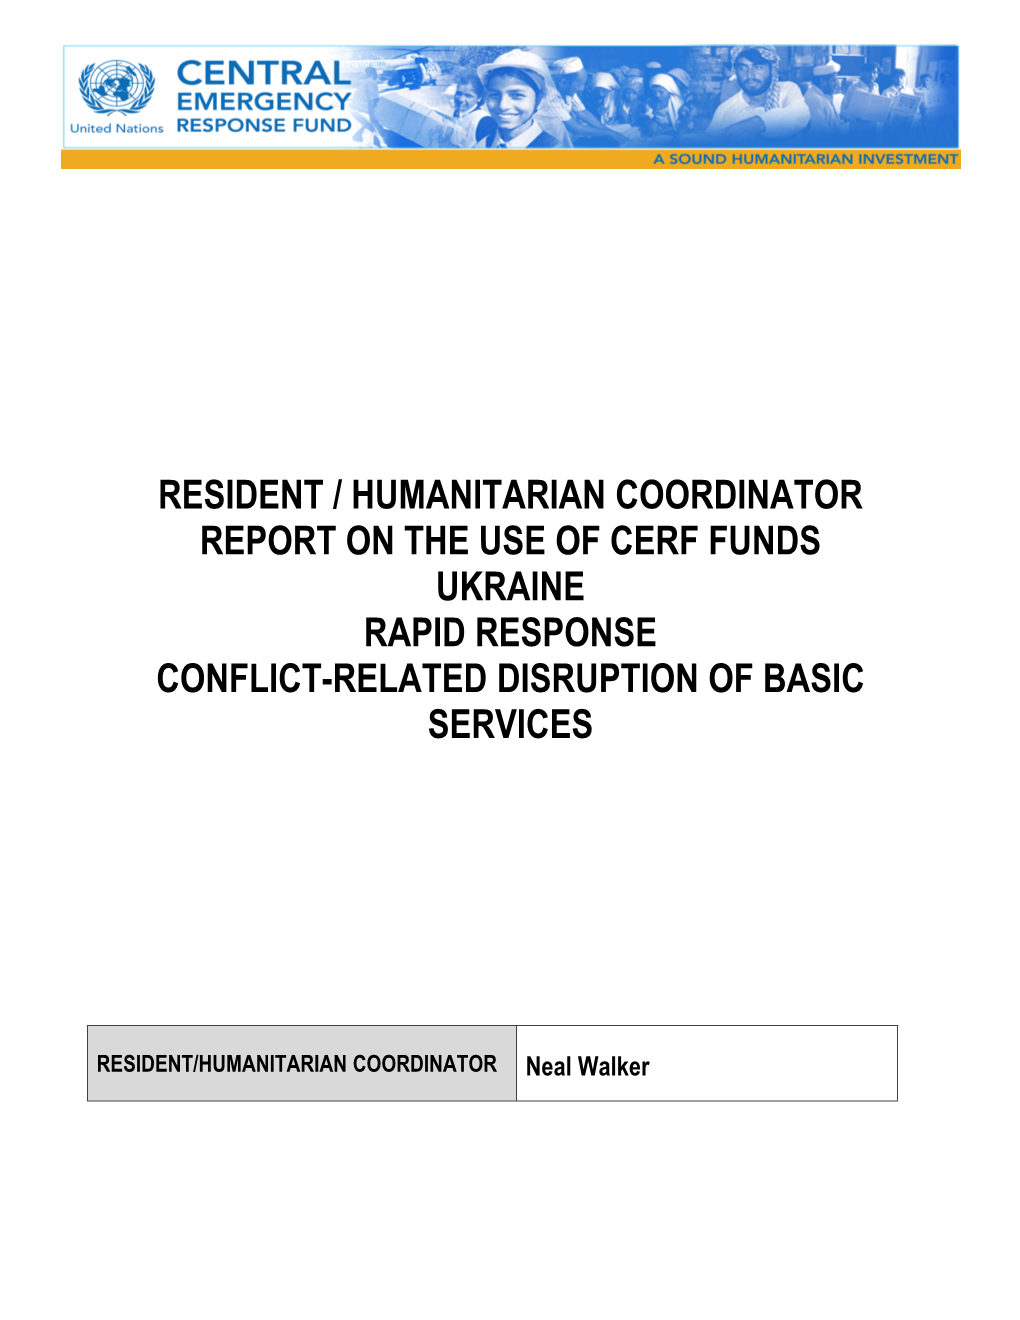 Ukraine Rapid Response Conflict-Related Disruption of Basic Services